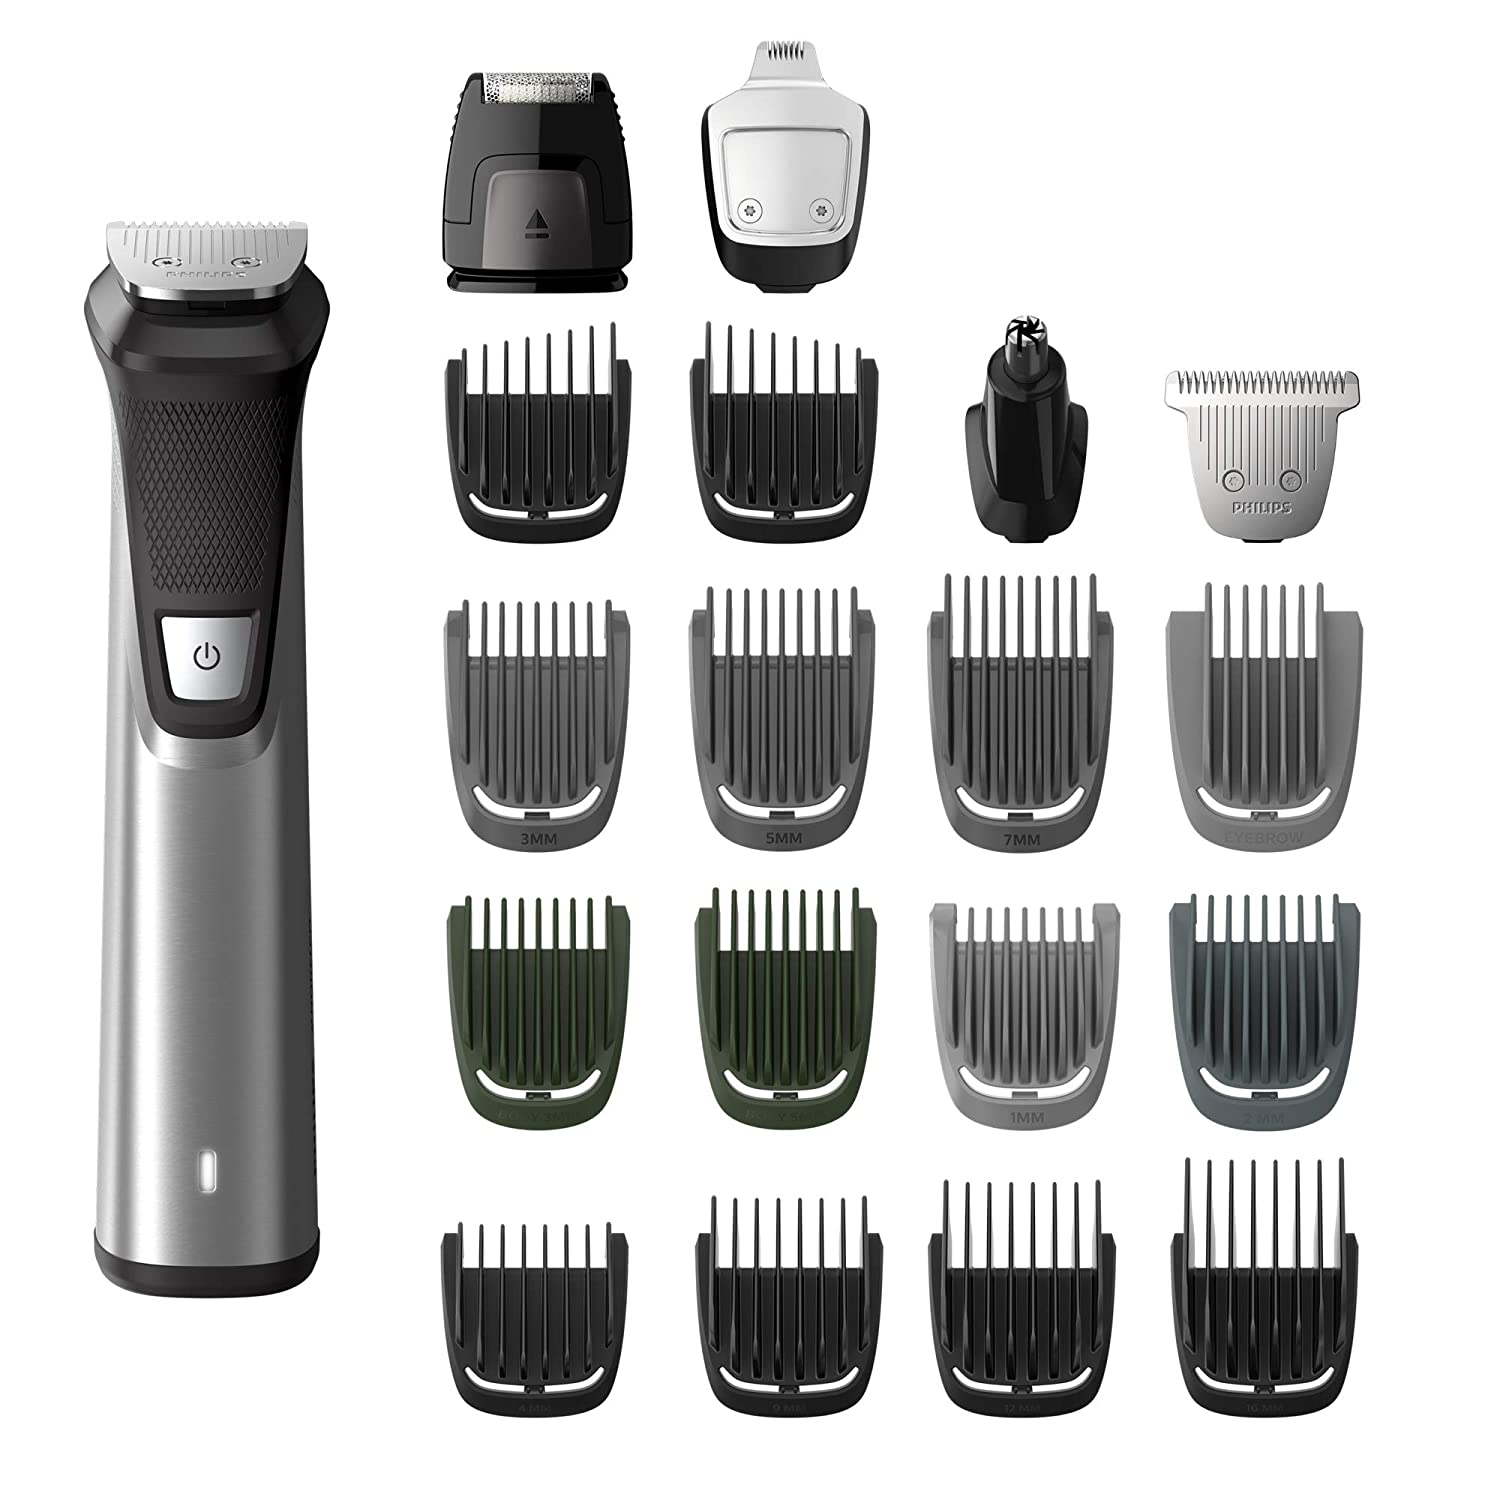 Philips Norelco Multigroom Series 7000 $34.99 - Shipping is free with prime or with orders $25+